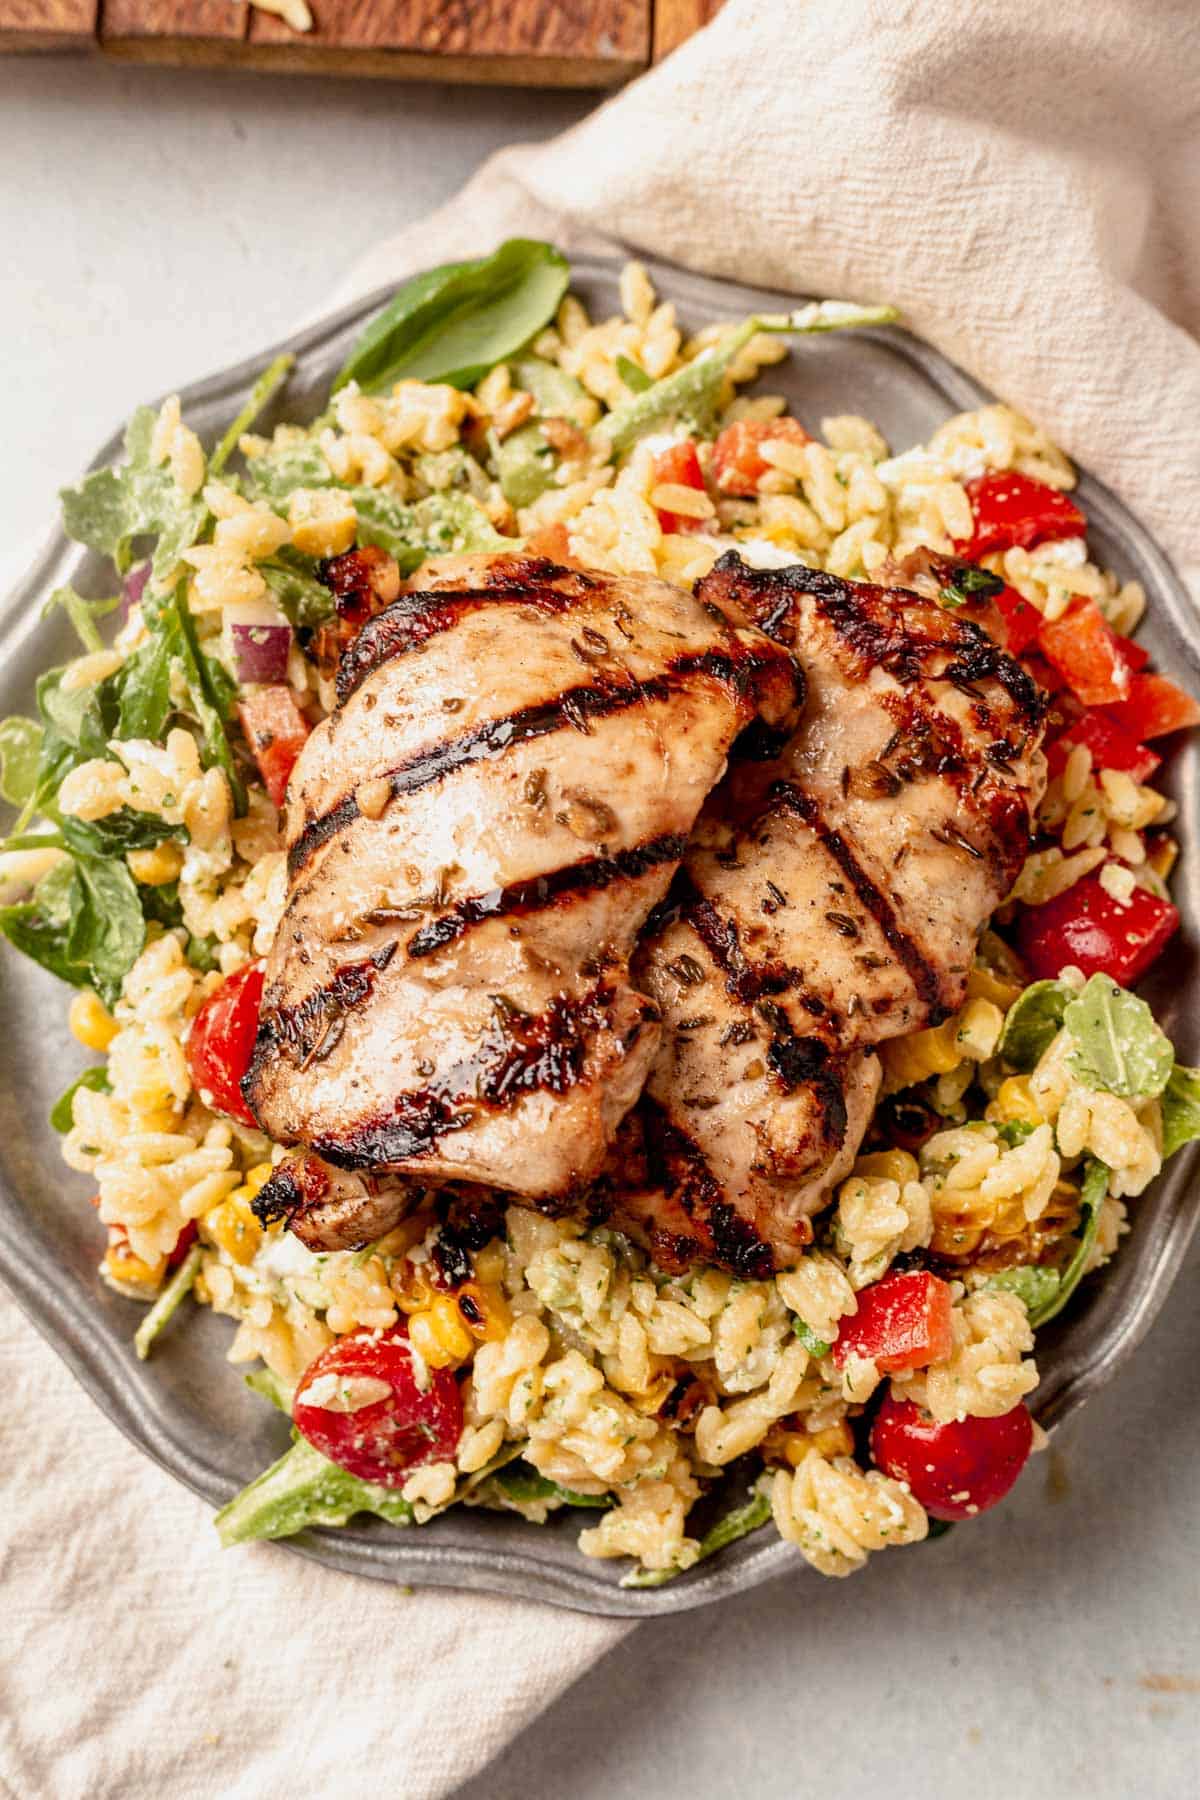 grilled chicken thighs on top of orzo pasta salad